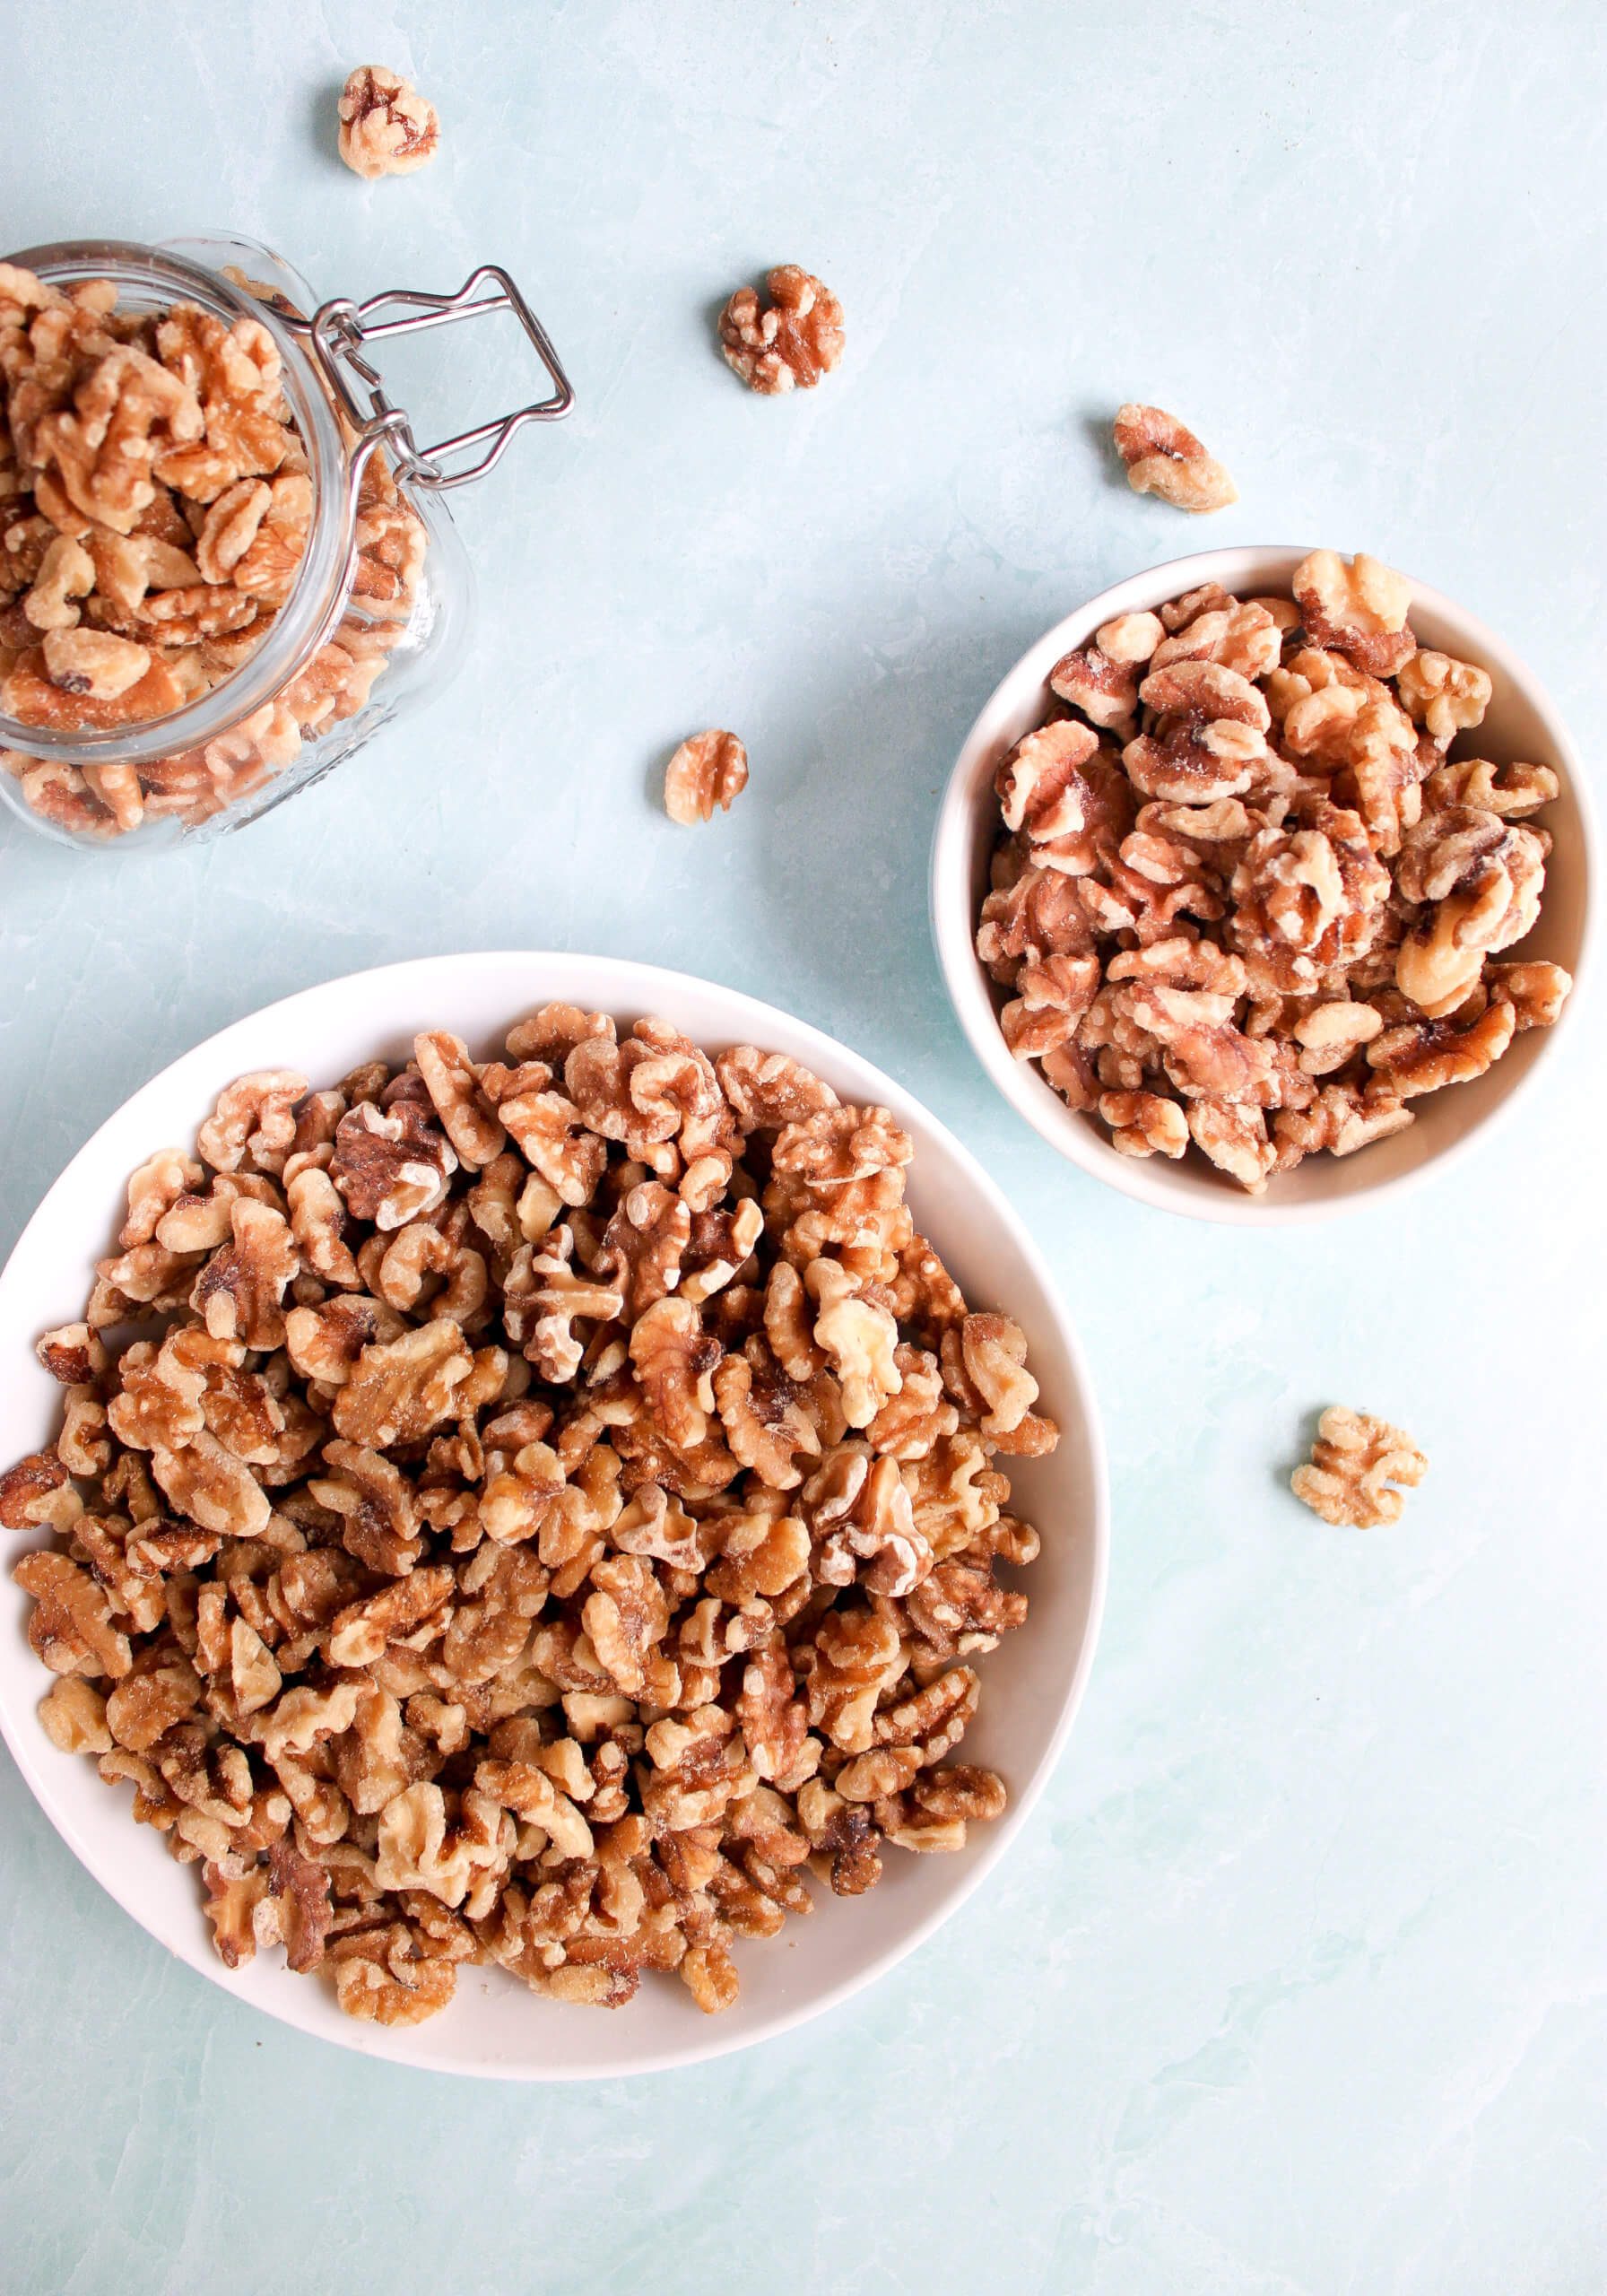 All About California Walnuts